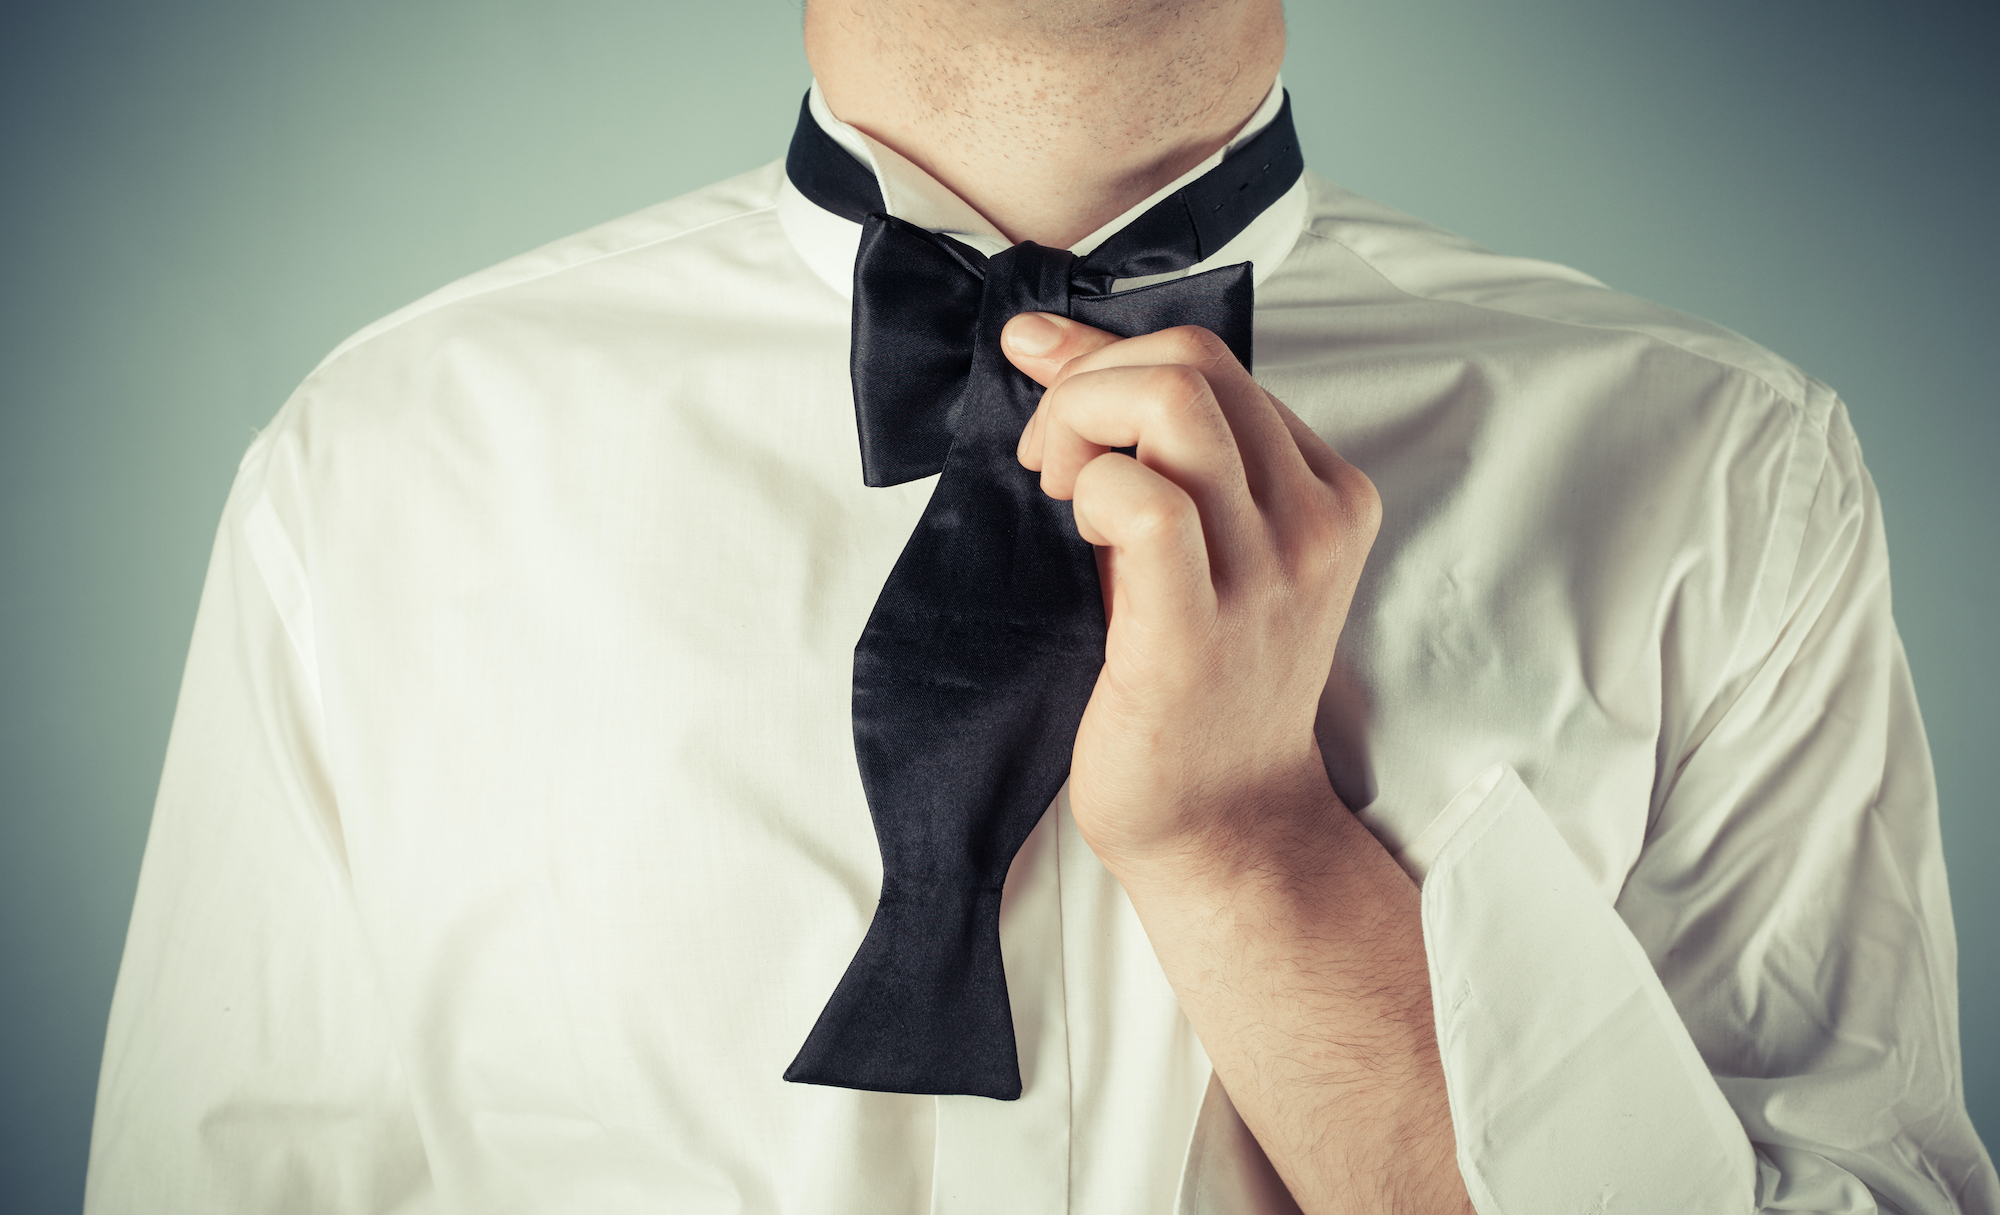 How to tie a bow tie: put the longer end in the center of the shorter